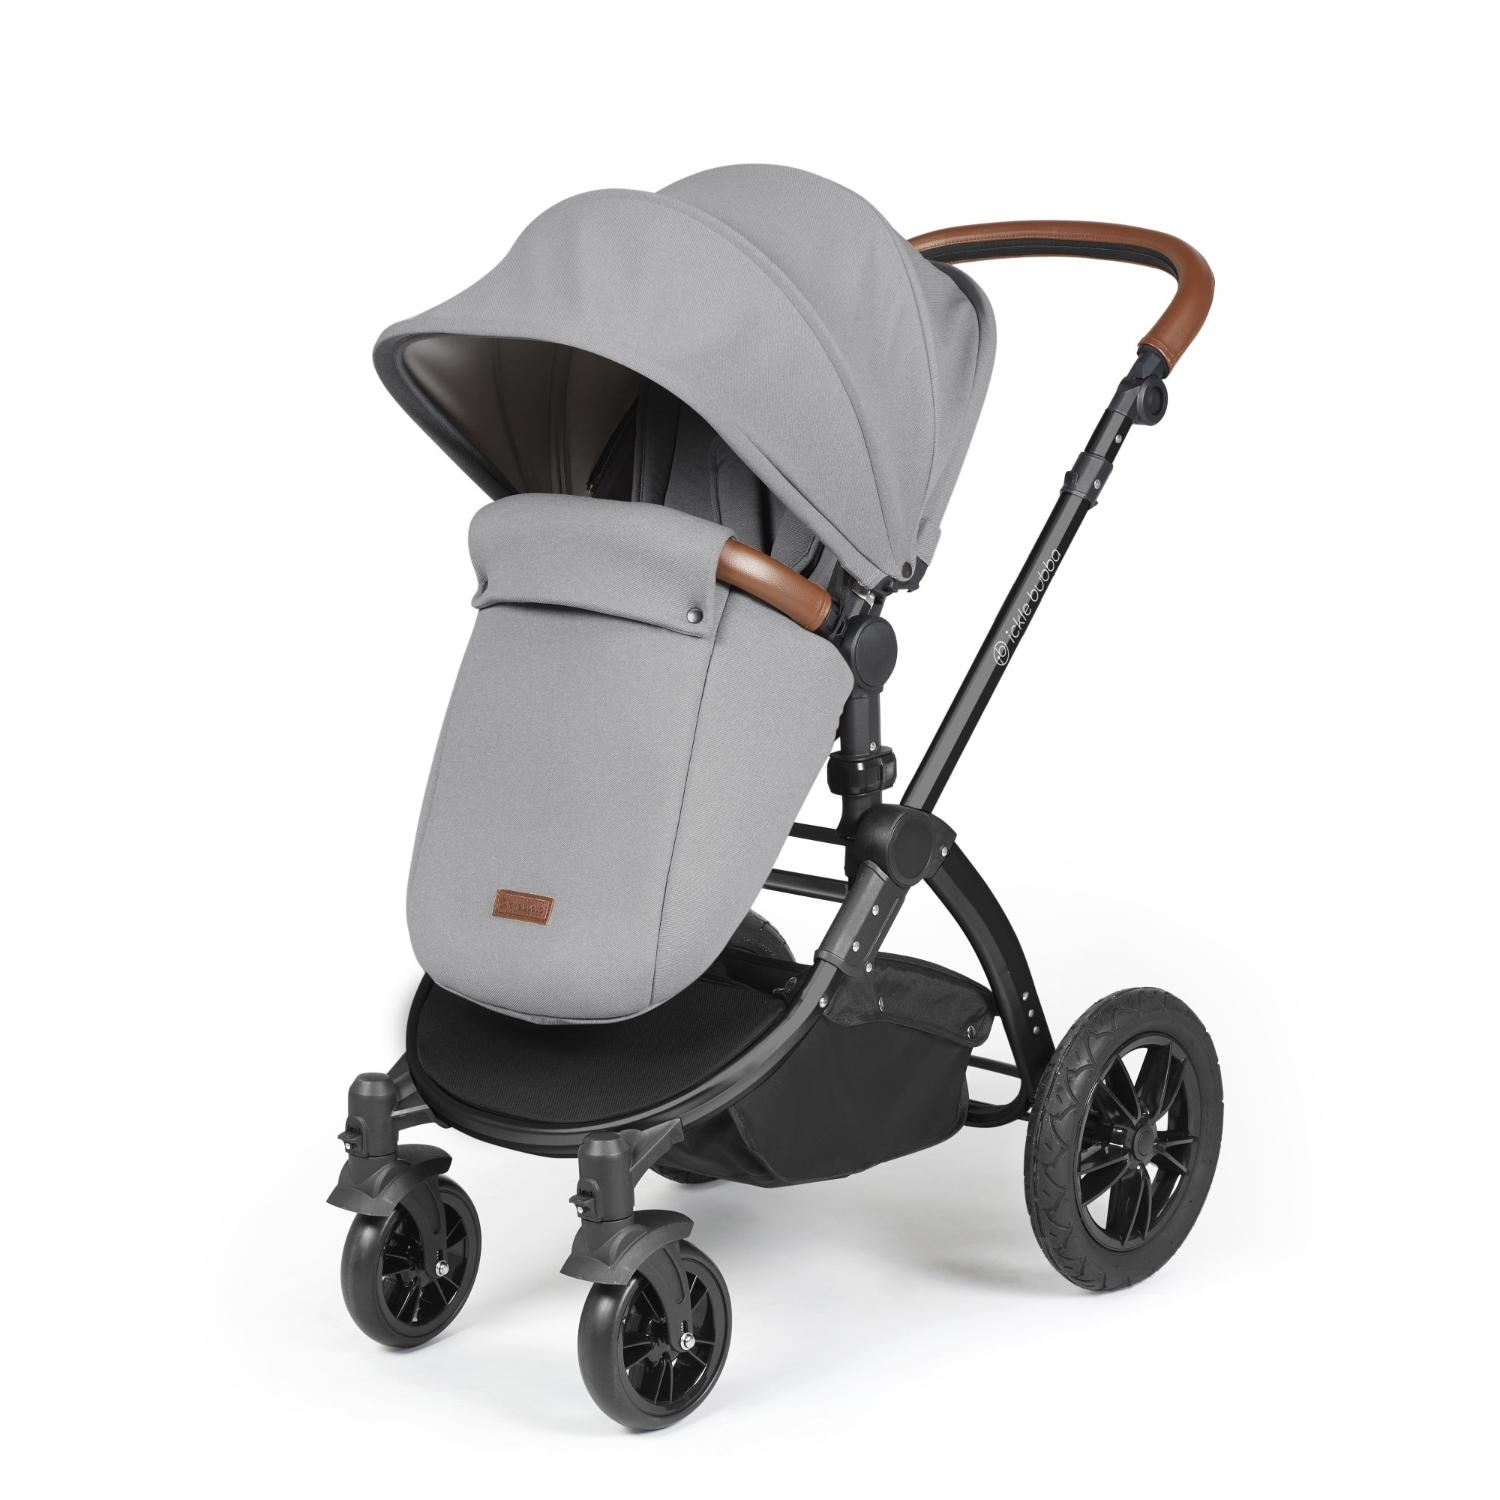 Ickle Bubba Stomp Luxe Pushchair with foot warmer attached in Pearl Grey colour with tan handle